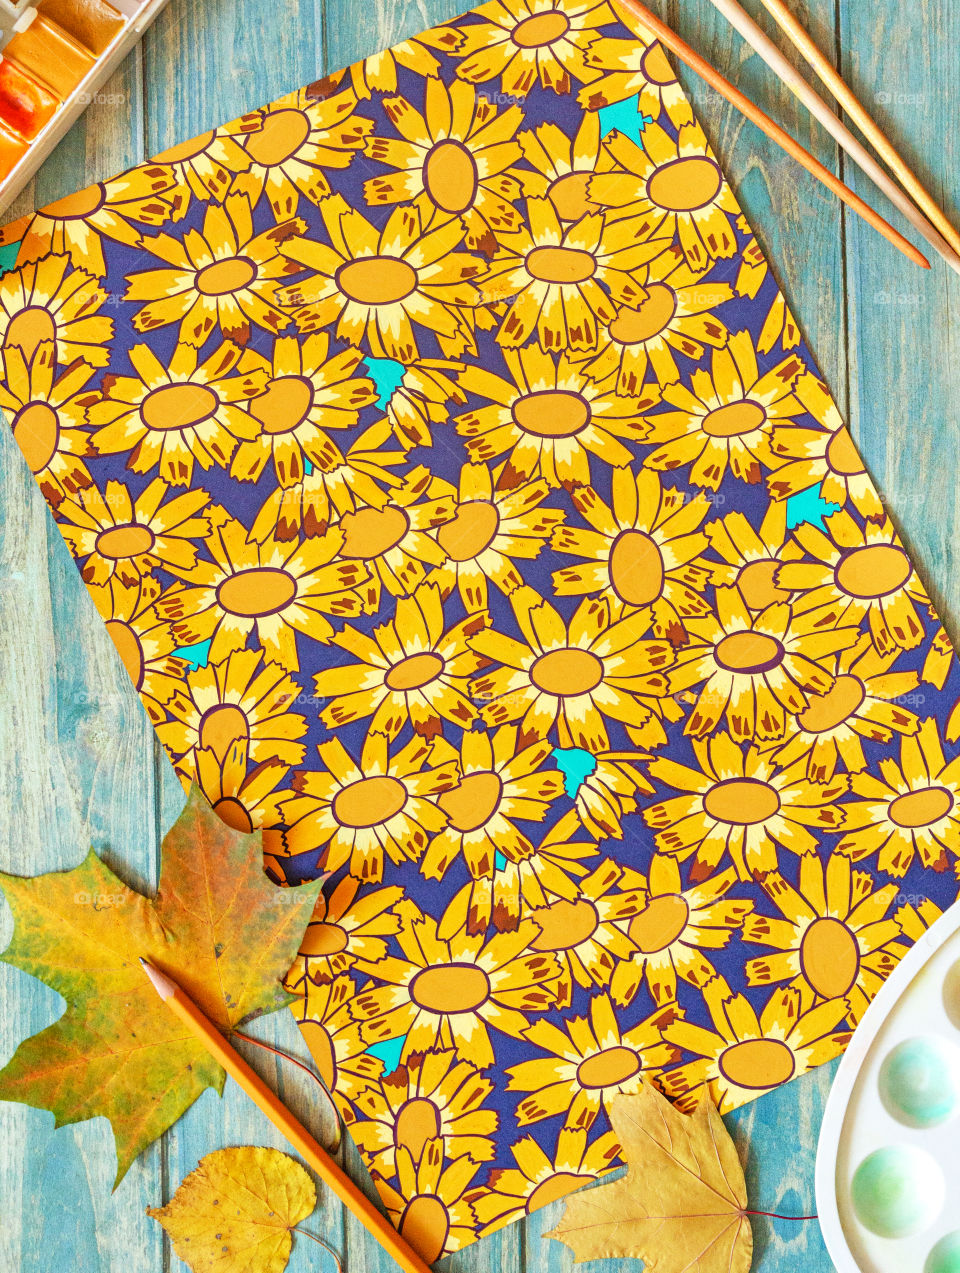 Creative work, paint drawing.  A table with a decorative repeating pattern with daisies, next to which are brushes, watercolor and gouache paints, a palette and dry autumn colored leaves.